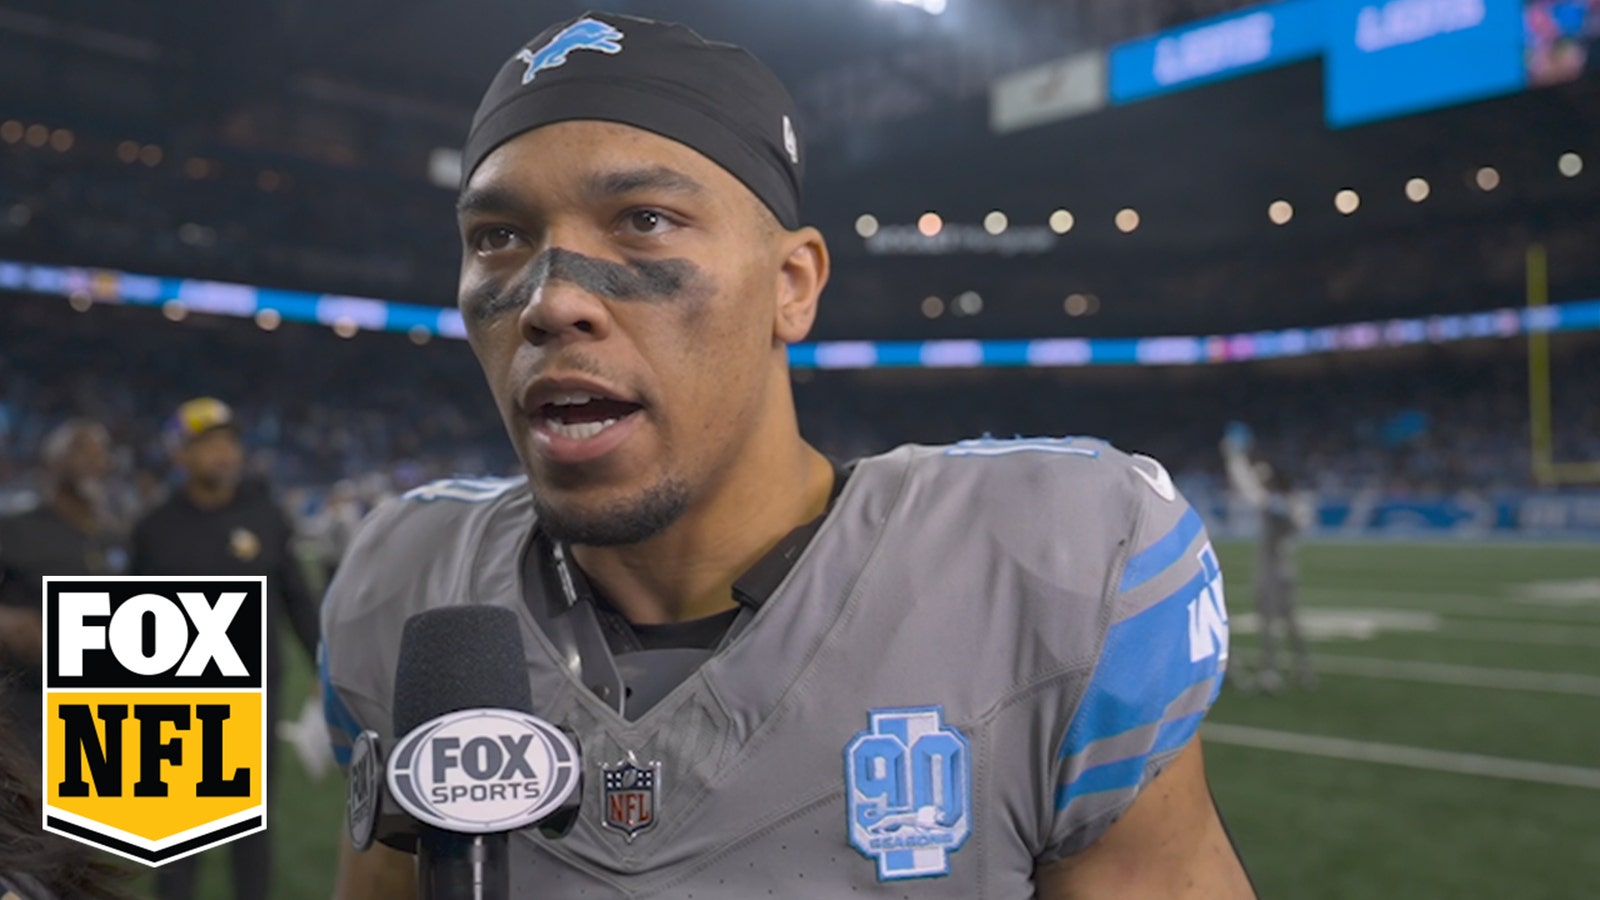 'Now it's on to the playoffs' – Amon-Ra St. Brown after Lions' dominant win over Vikings